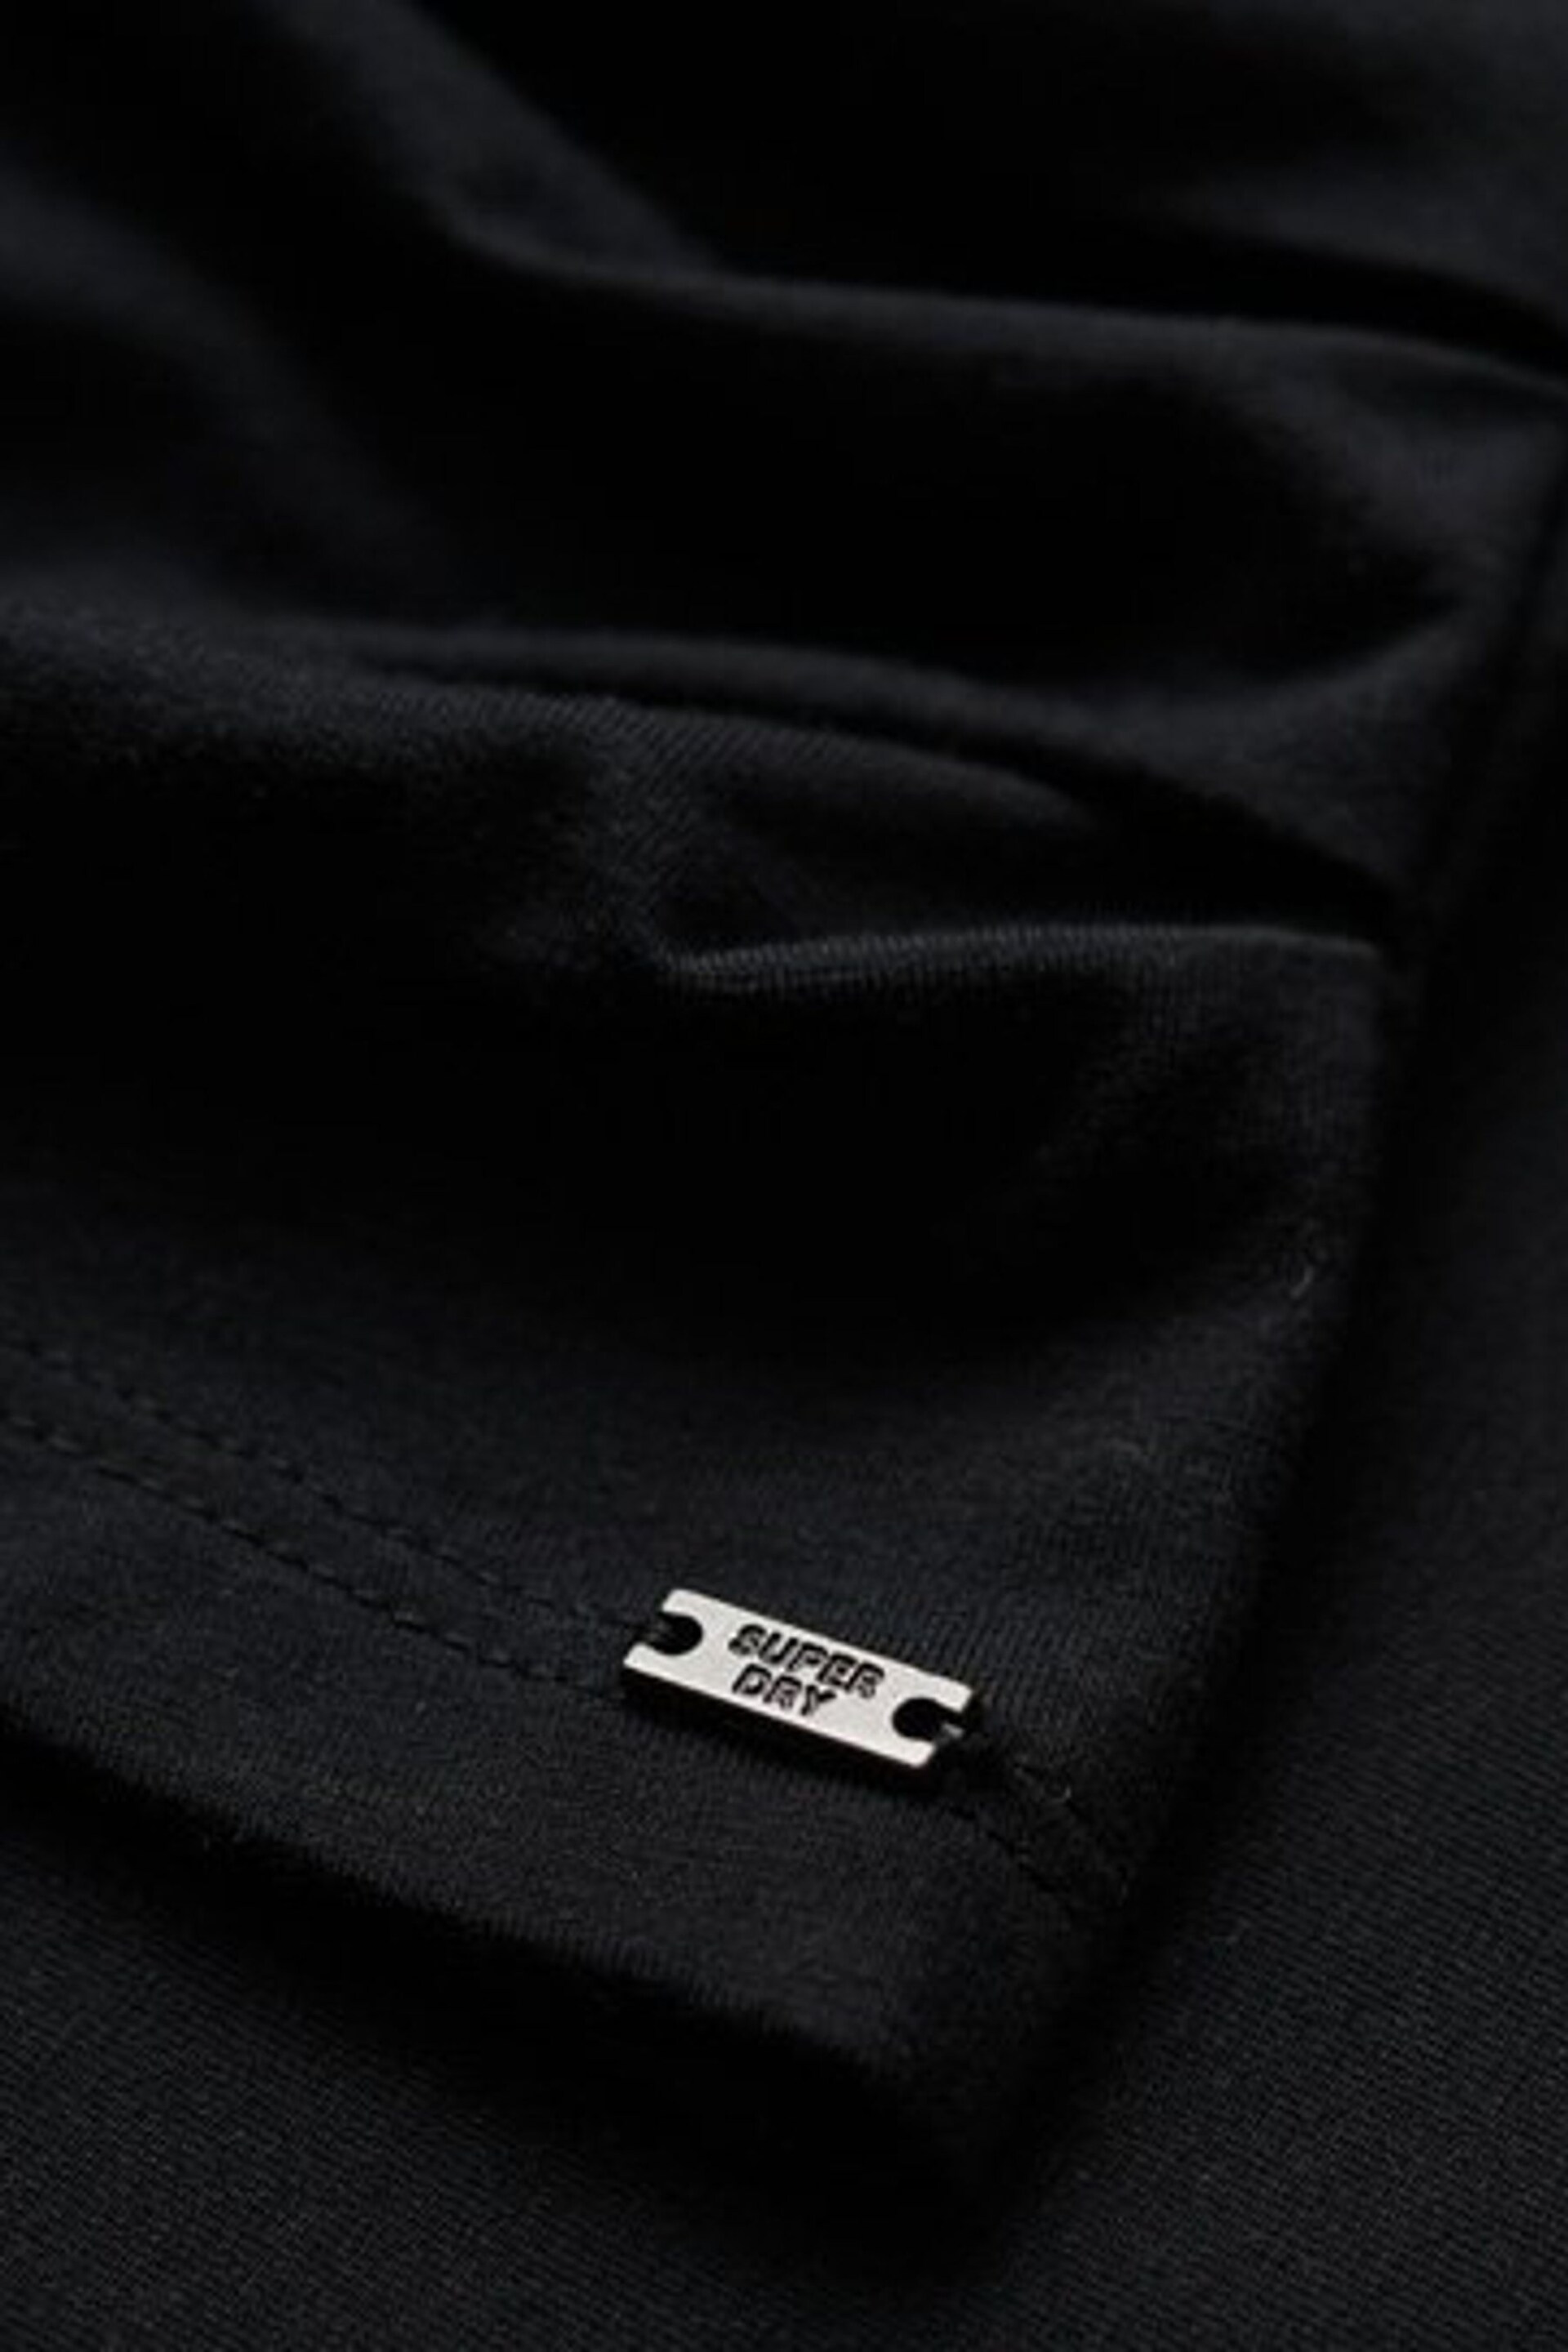 Superdry Black Long Sleeve Ruched Jersey Top - Image 5 of 5